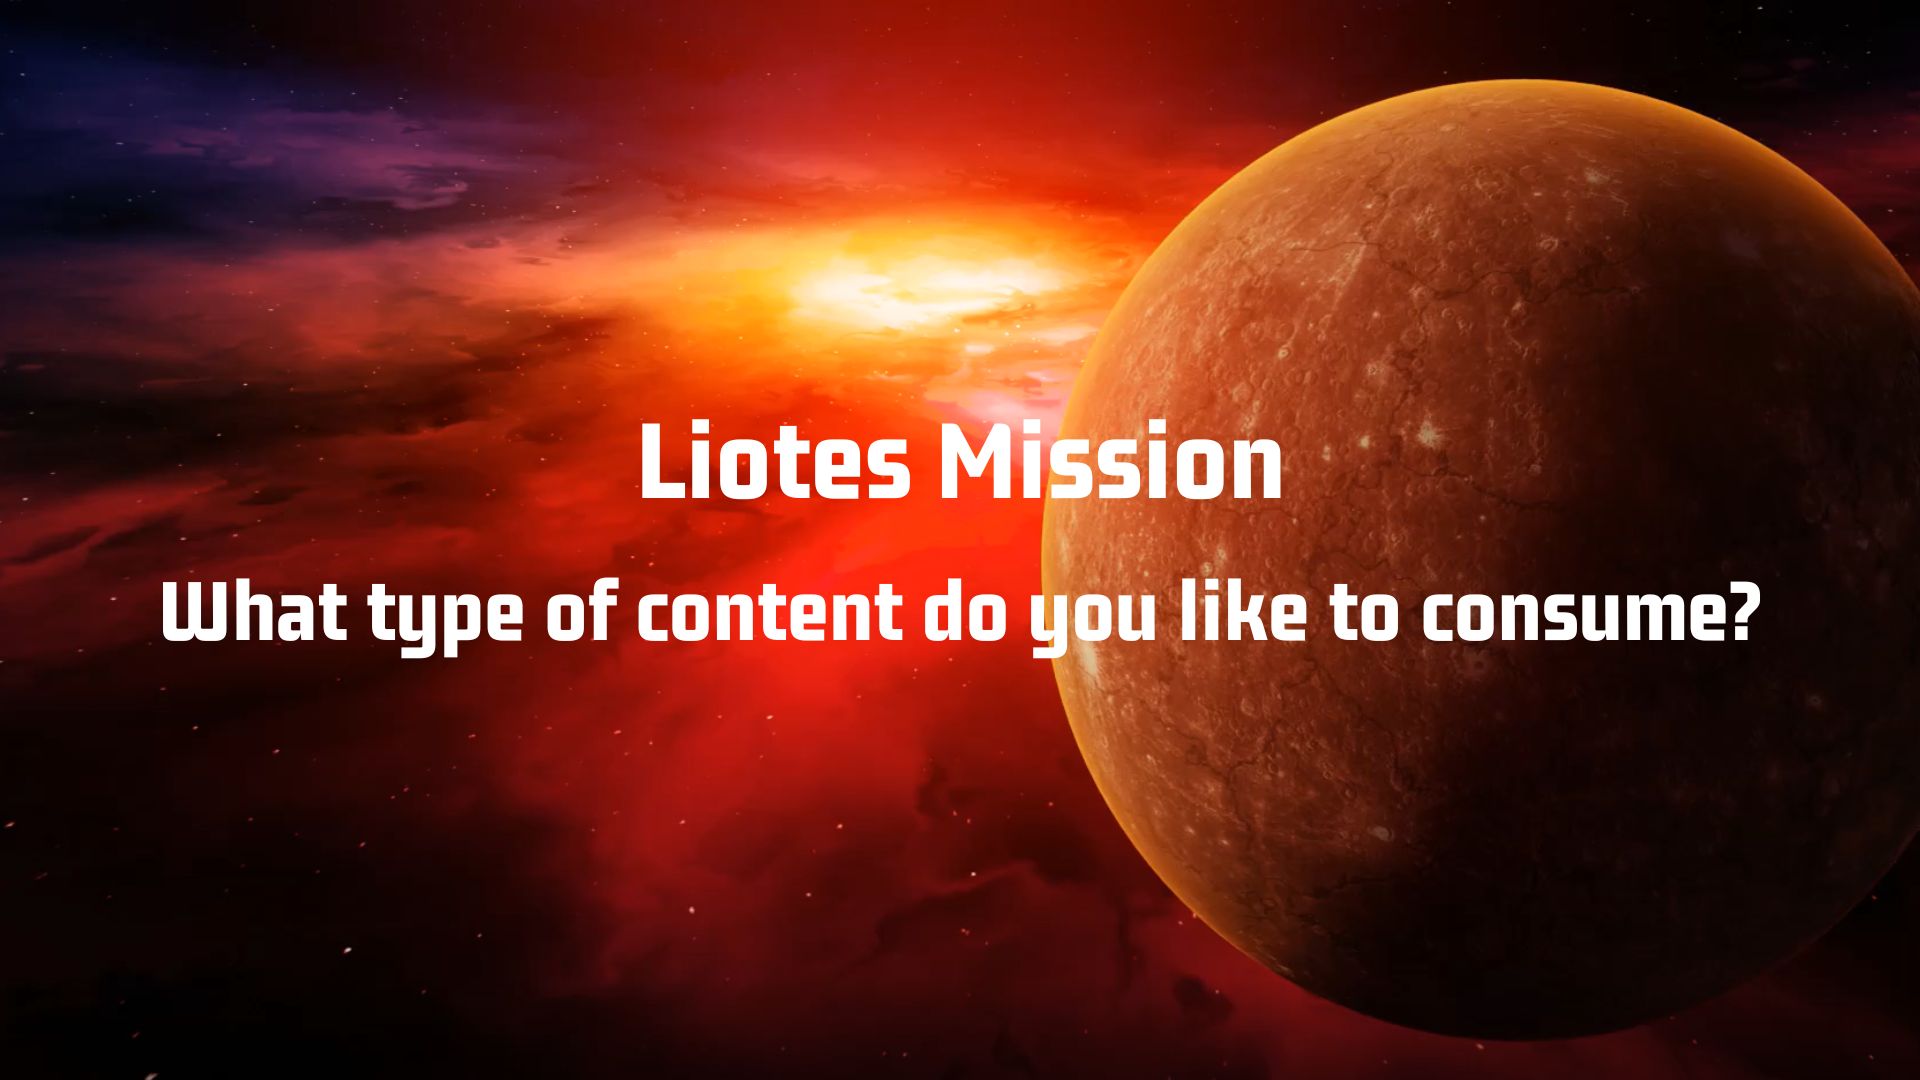 @liotes/what-type-of-content-do-you-like-to-consume